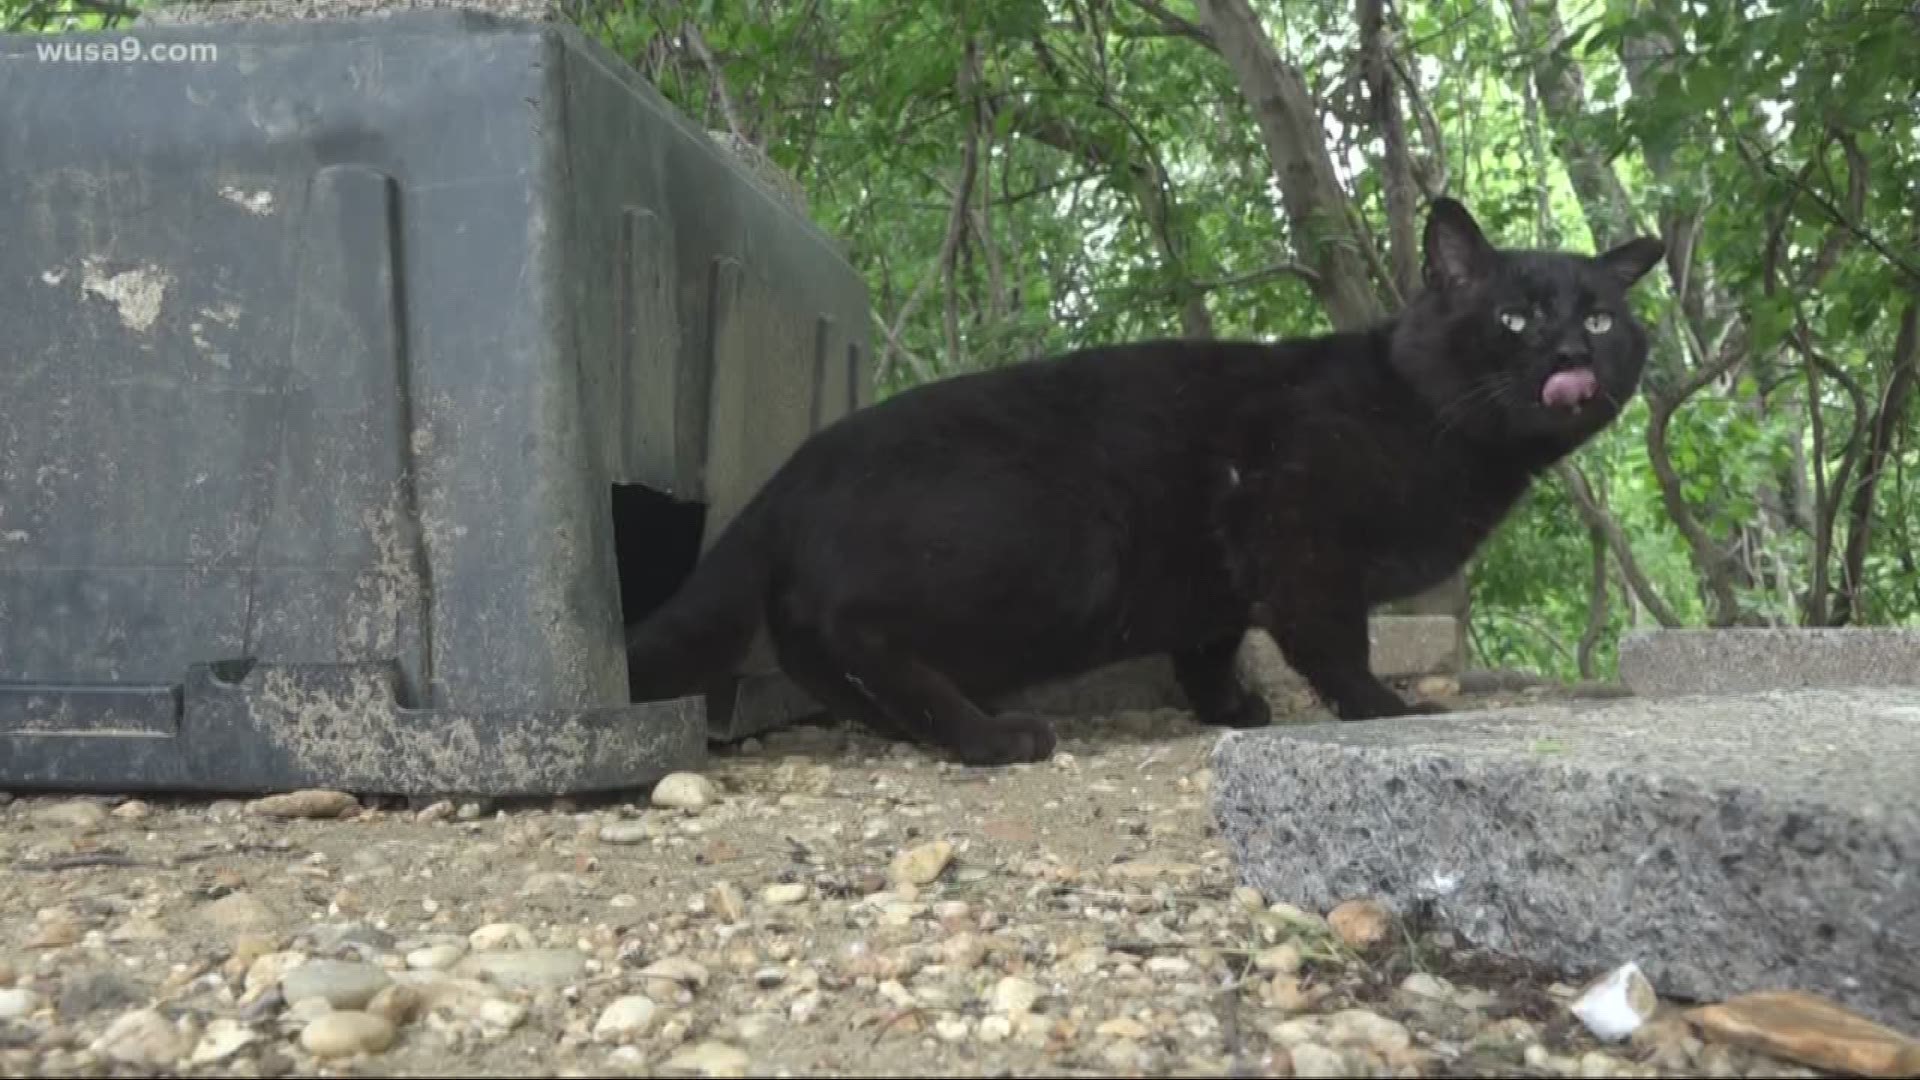 One woman feeds about 20 feral cats daily in their colony behind a strip mall. But some environmentalists say that’s doing more harm than good. Here’s why.